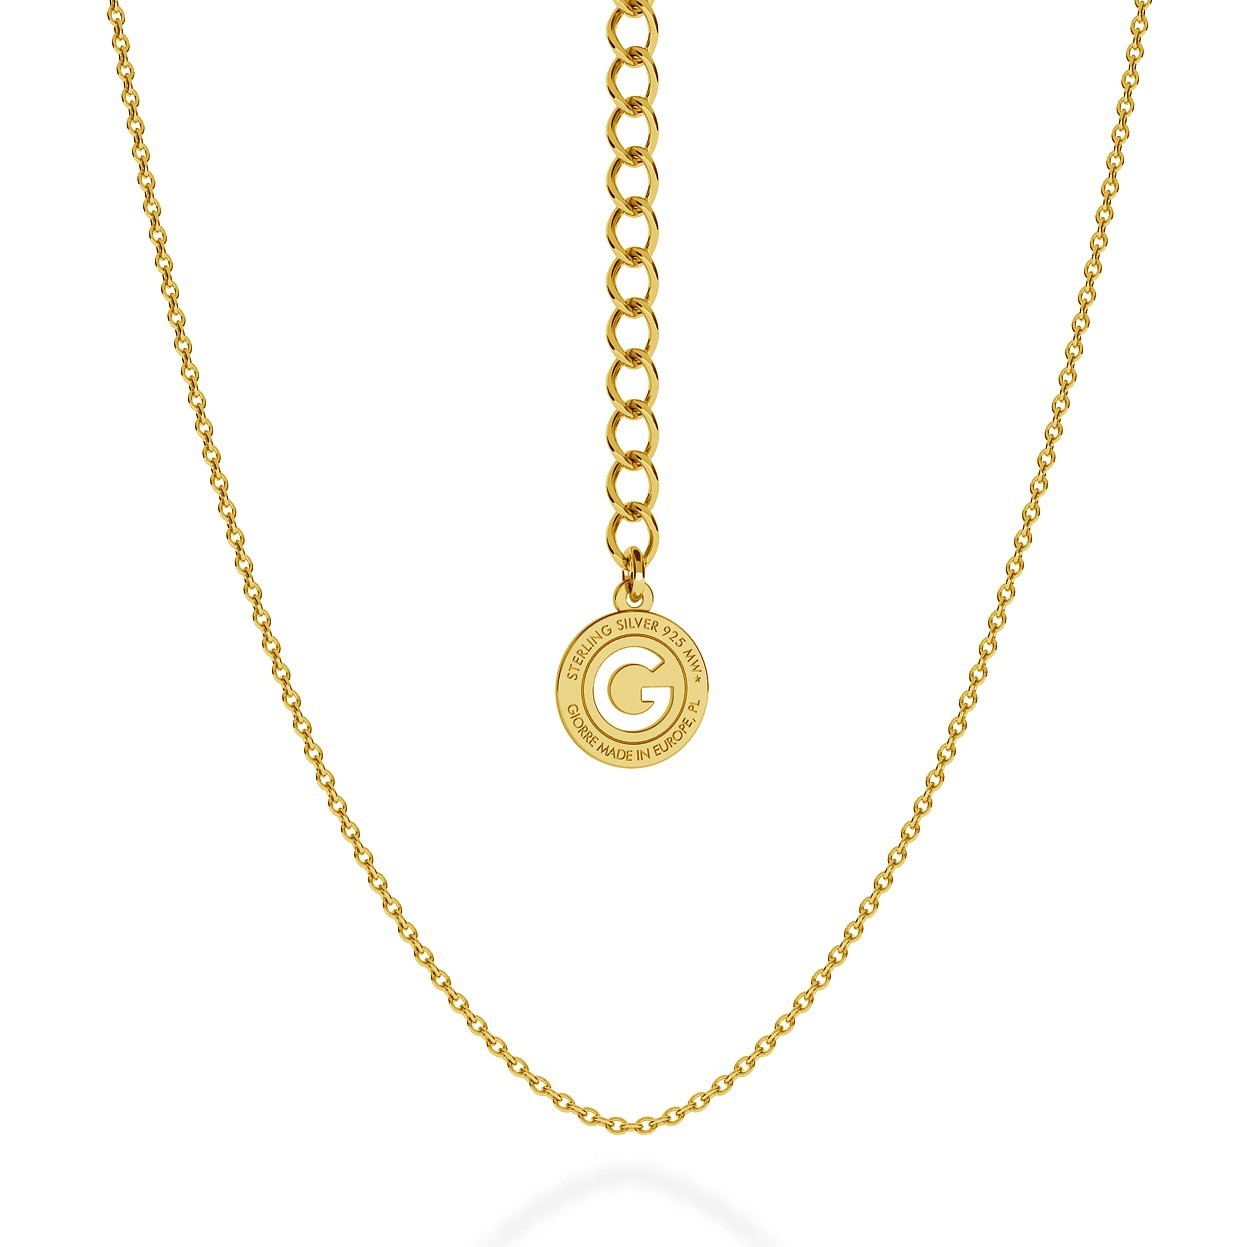 LIGHT SILVER NECKLACE 55 CM, GOLD PLATED (YELLOW GOLD)